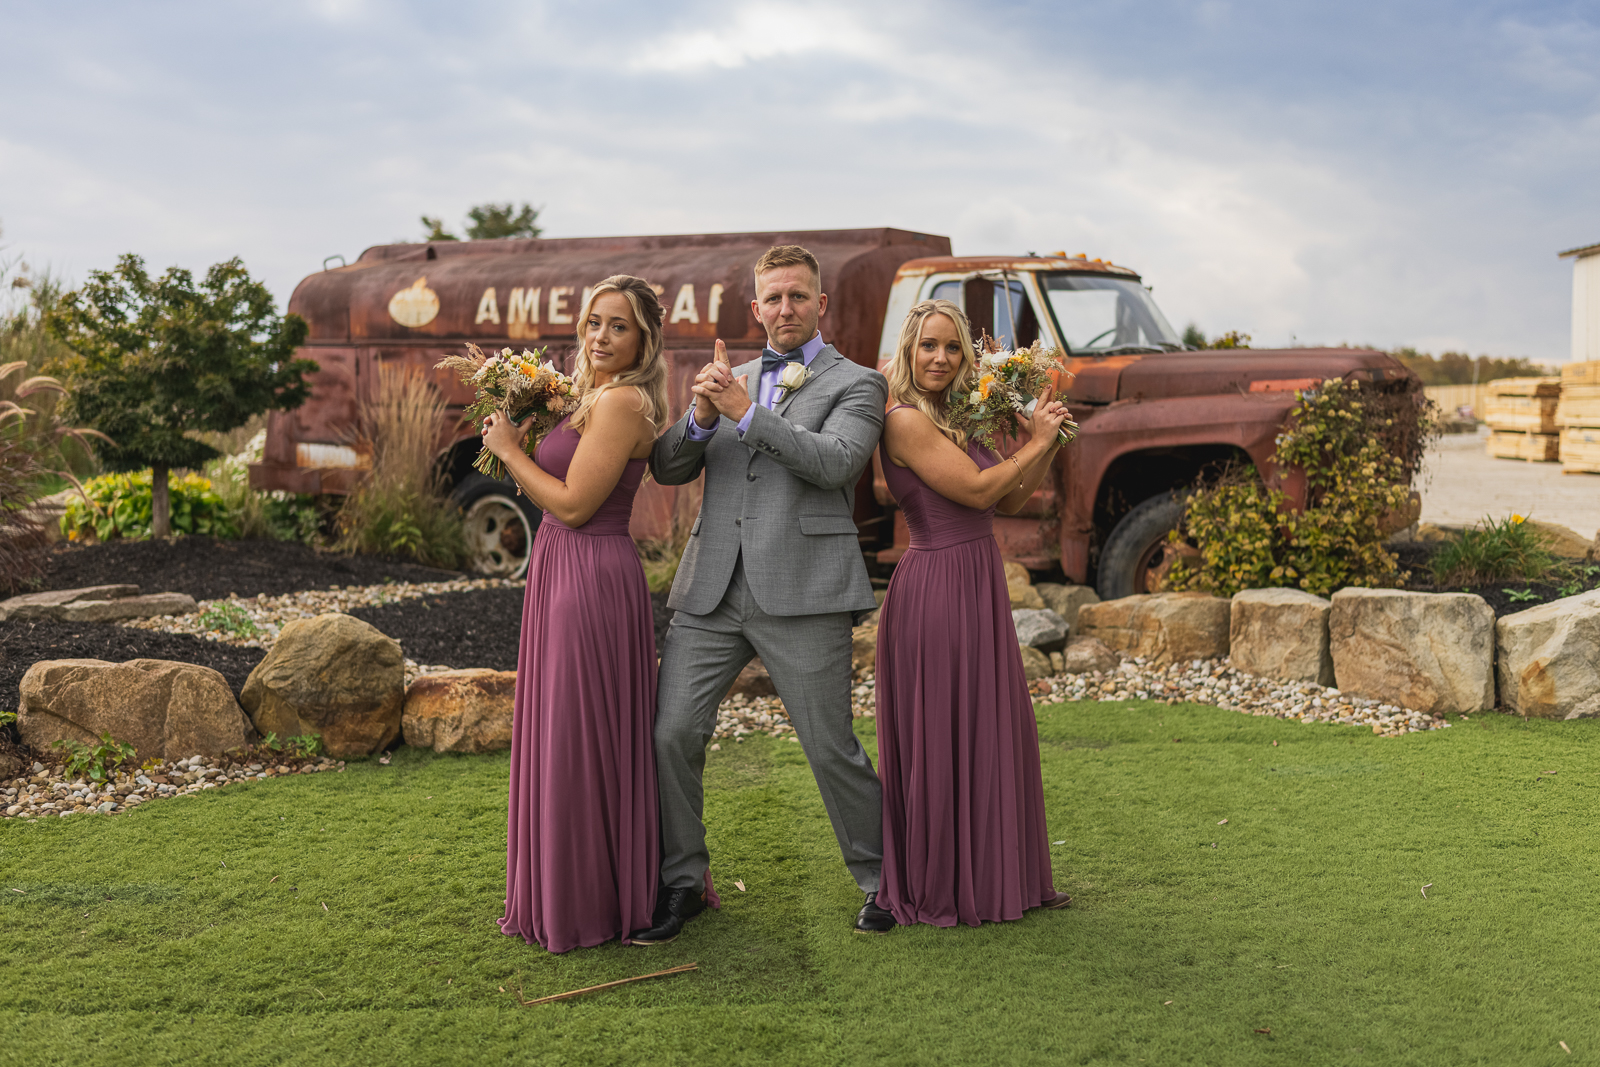 Groom with bridesmaids, bridal party portrait, fun bridal party portrait, old truck, American oil, fall wedding, outdoor rustic wedding ceremony at White Birch Barn